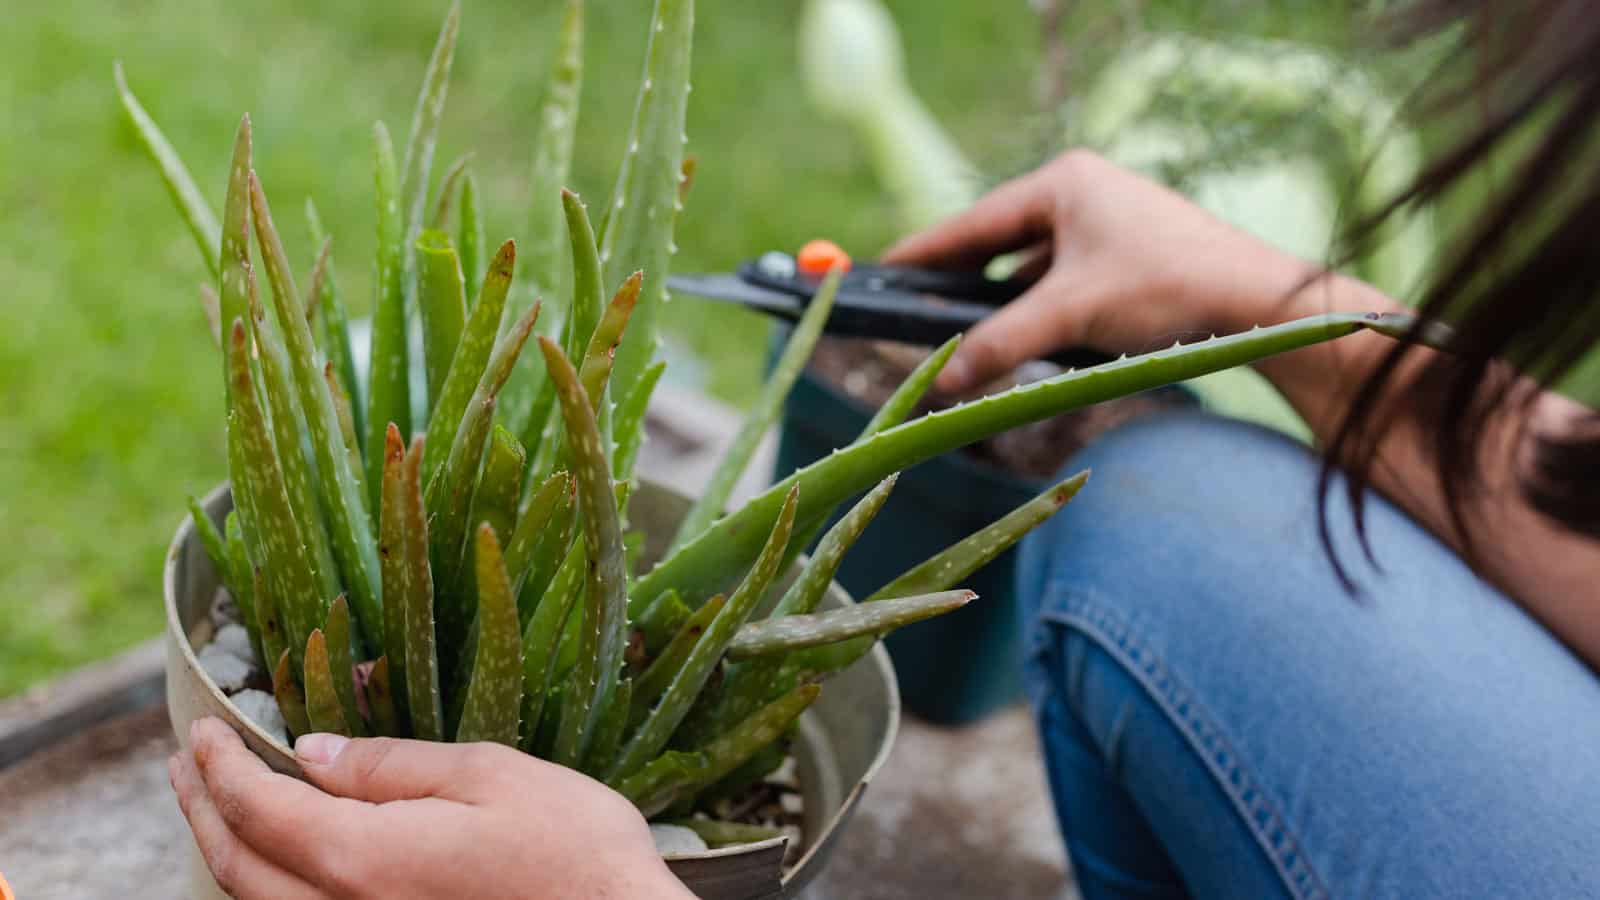 Gardener pruning a small aloe vera plant, Beginner's Guide to Pruning Aloe Vera Like a Pro - 1600x900